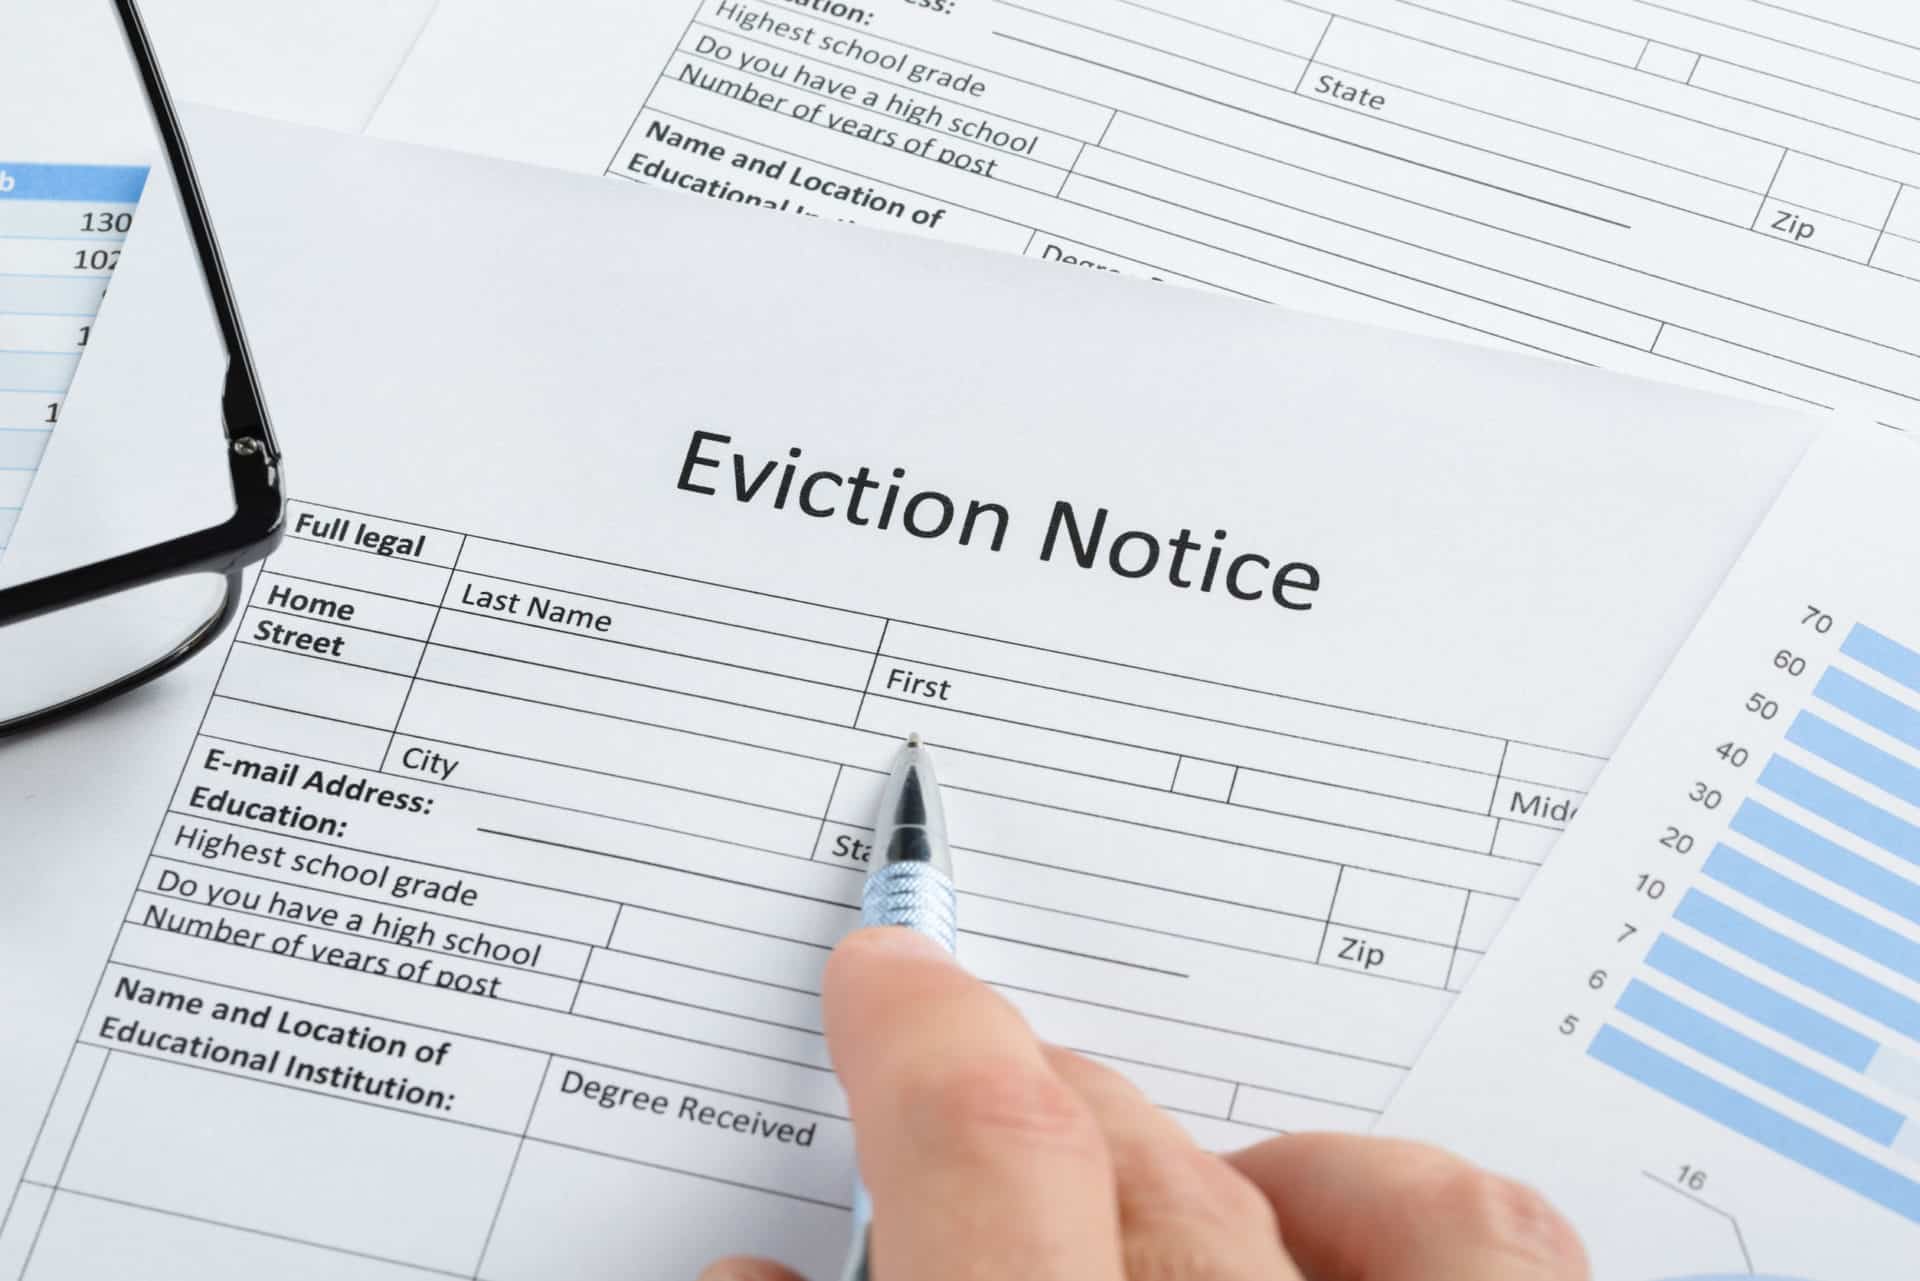 Get Help Filing a Hardship Declaration to Avoid NYC Eviction